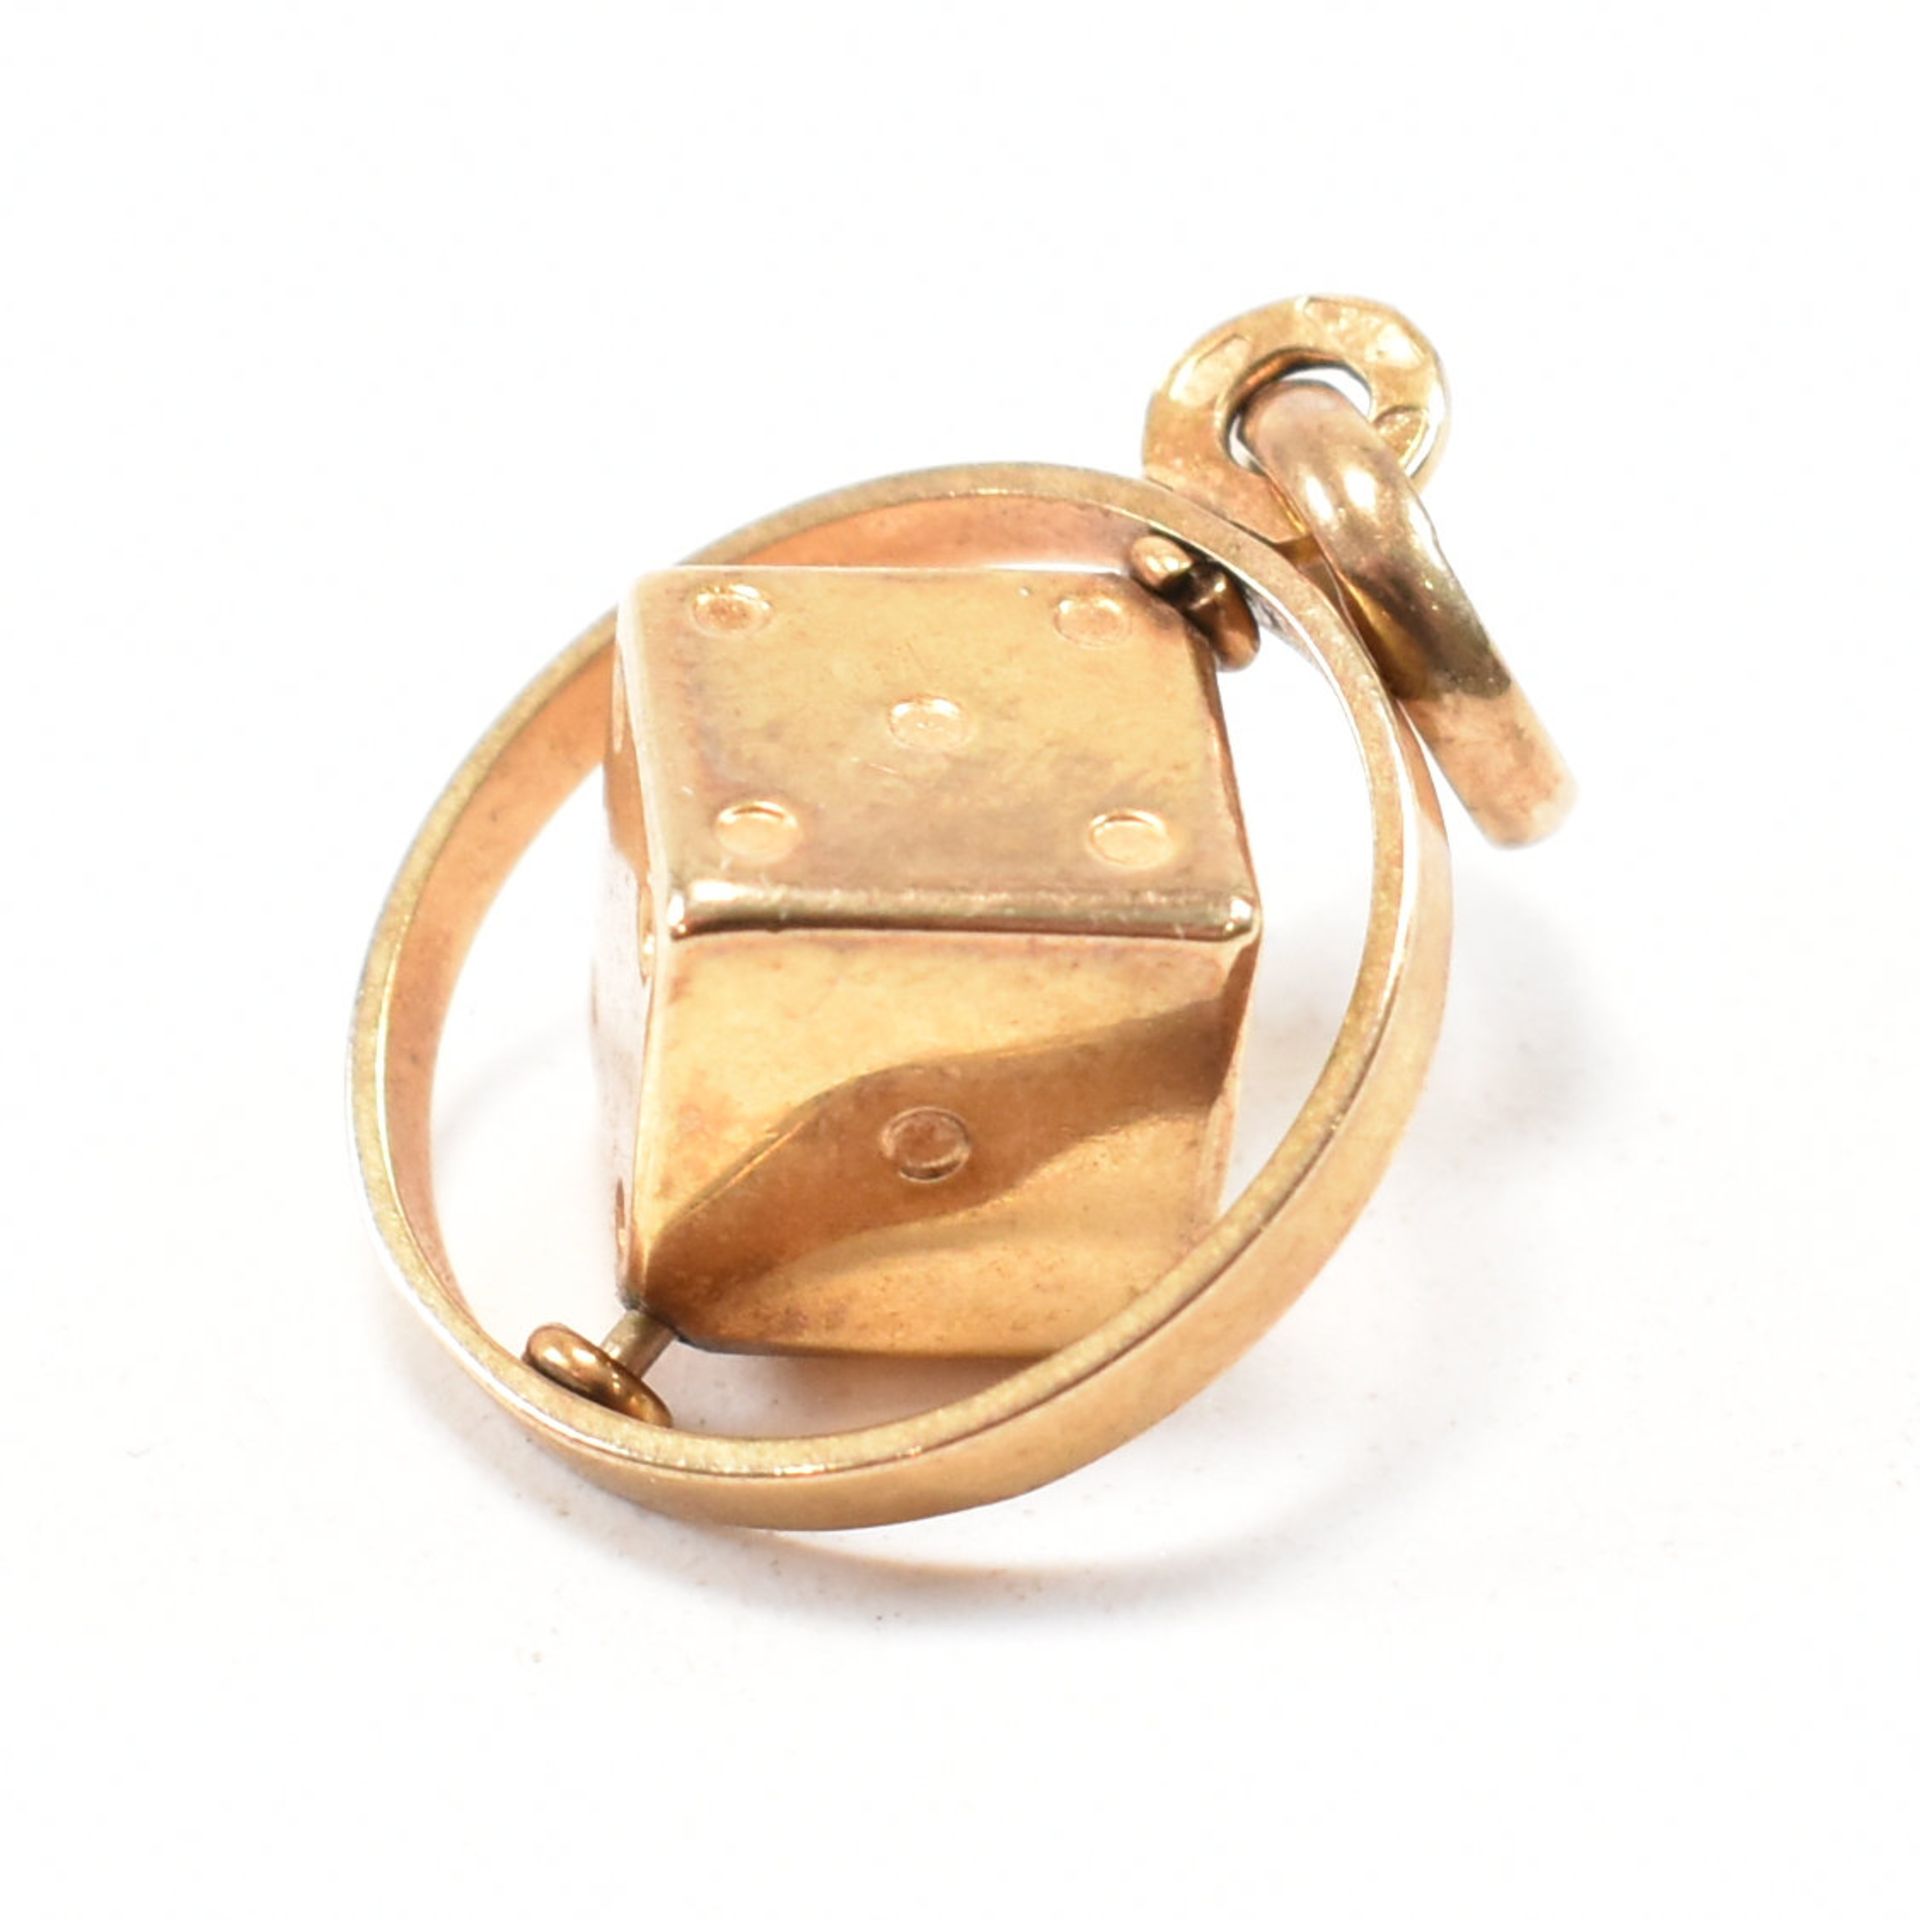 HALLMARKED 9CT GOLD ARTICULATED NECKLACE PENDANT - Image 5 of 6